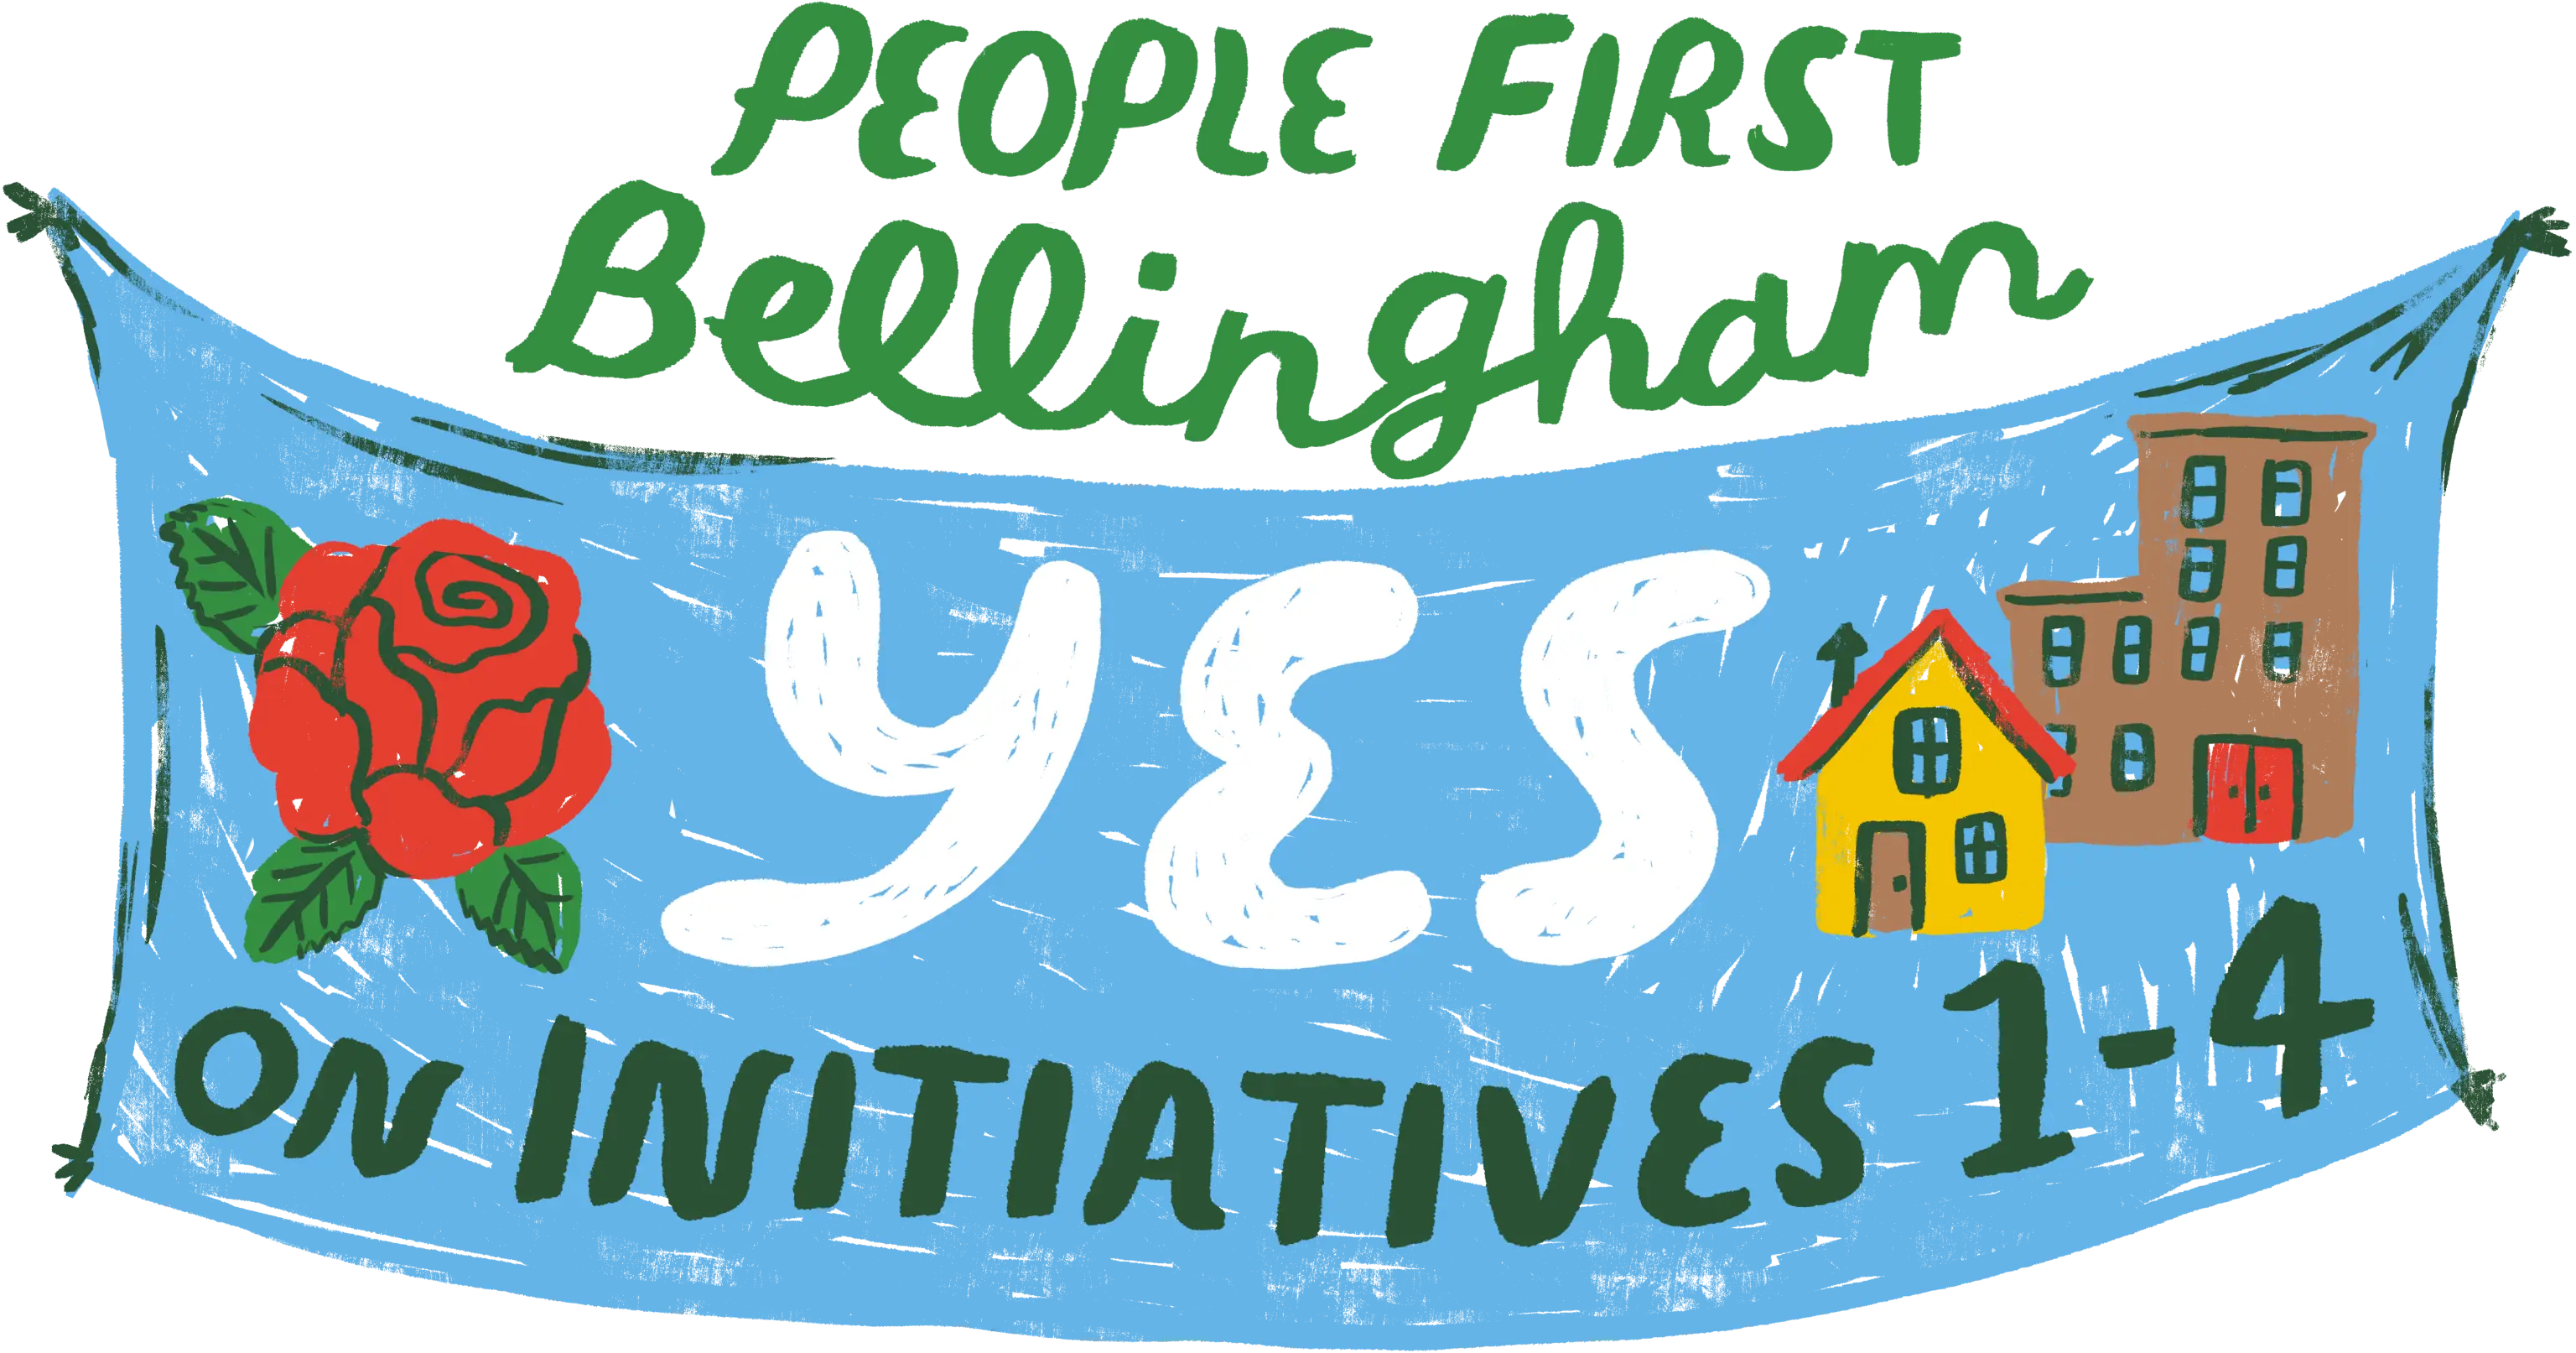 People First Bellingham - YES on
          initiatives 1-4